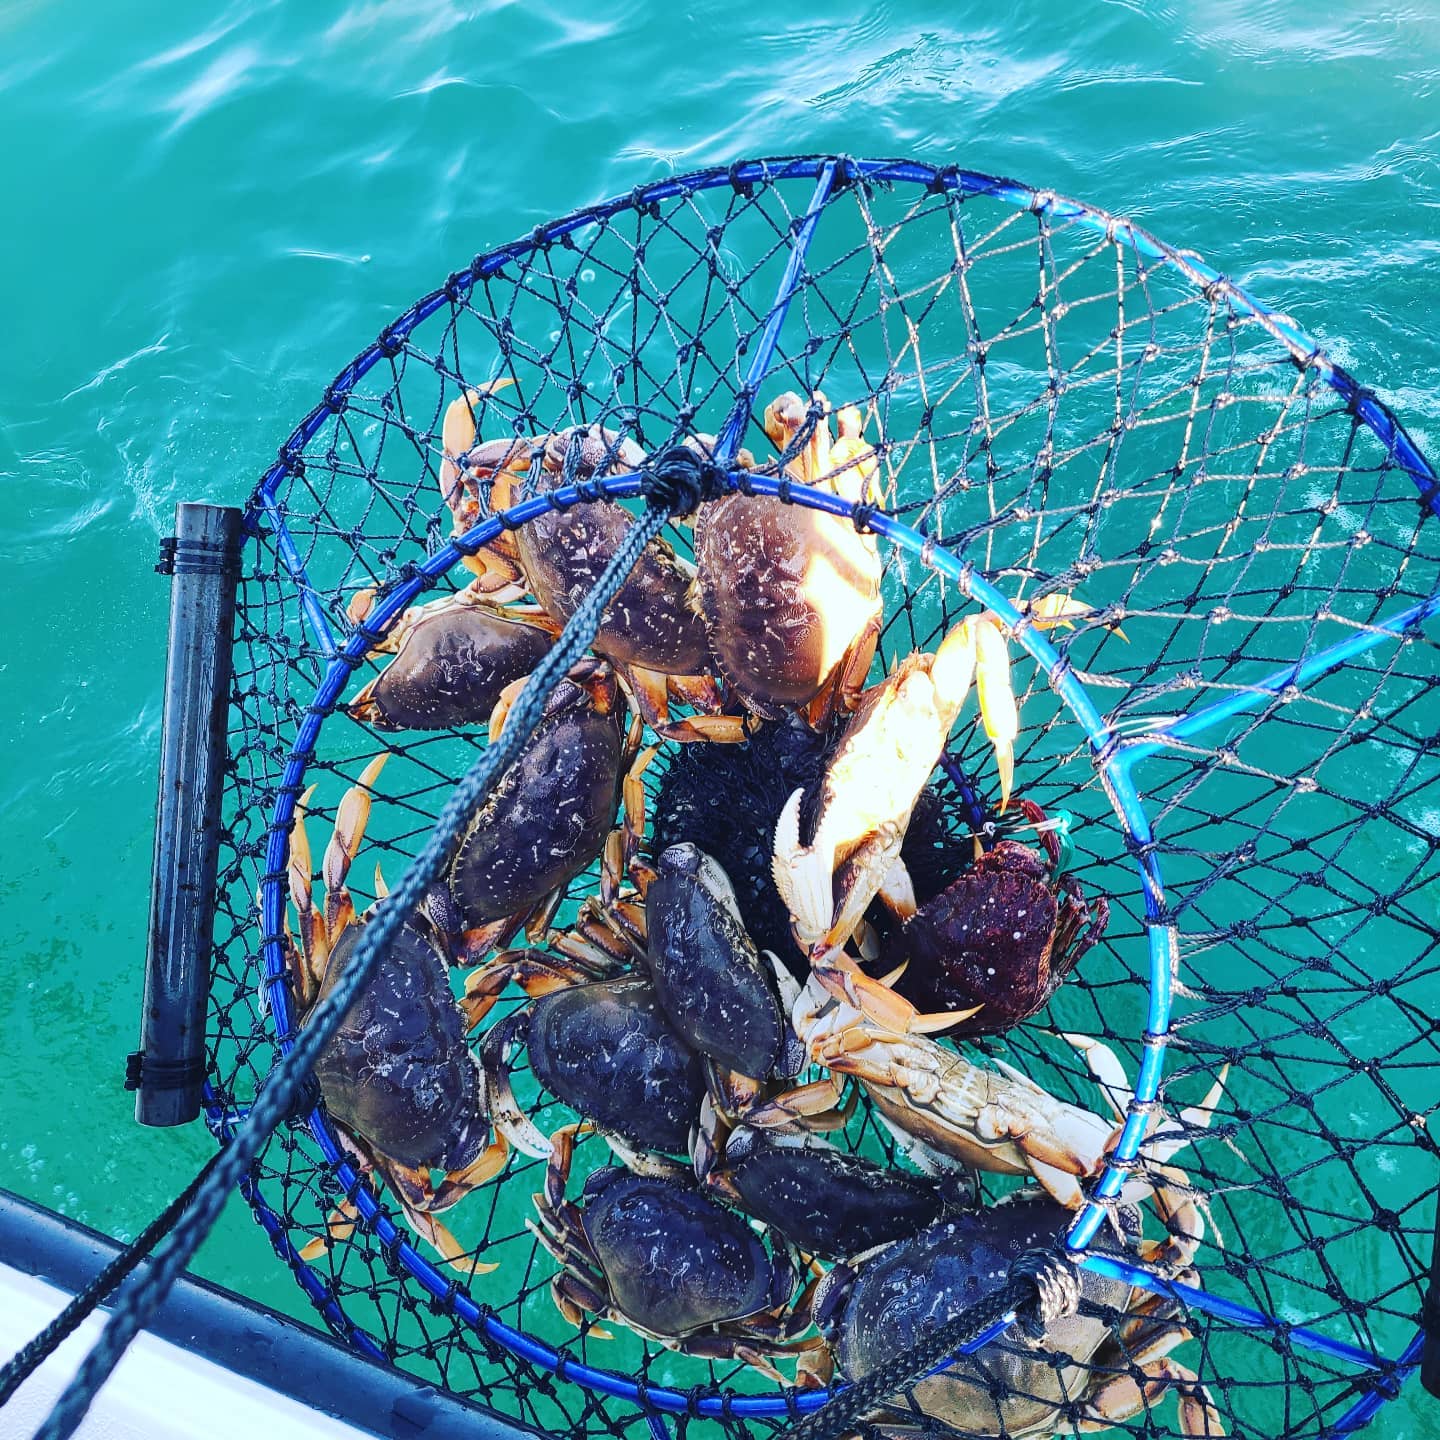 Hoop net Dungeness crab on the Reel Obsession out of Bodega Bay